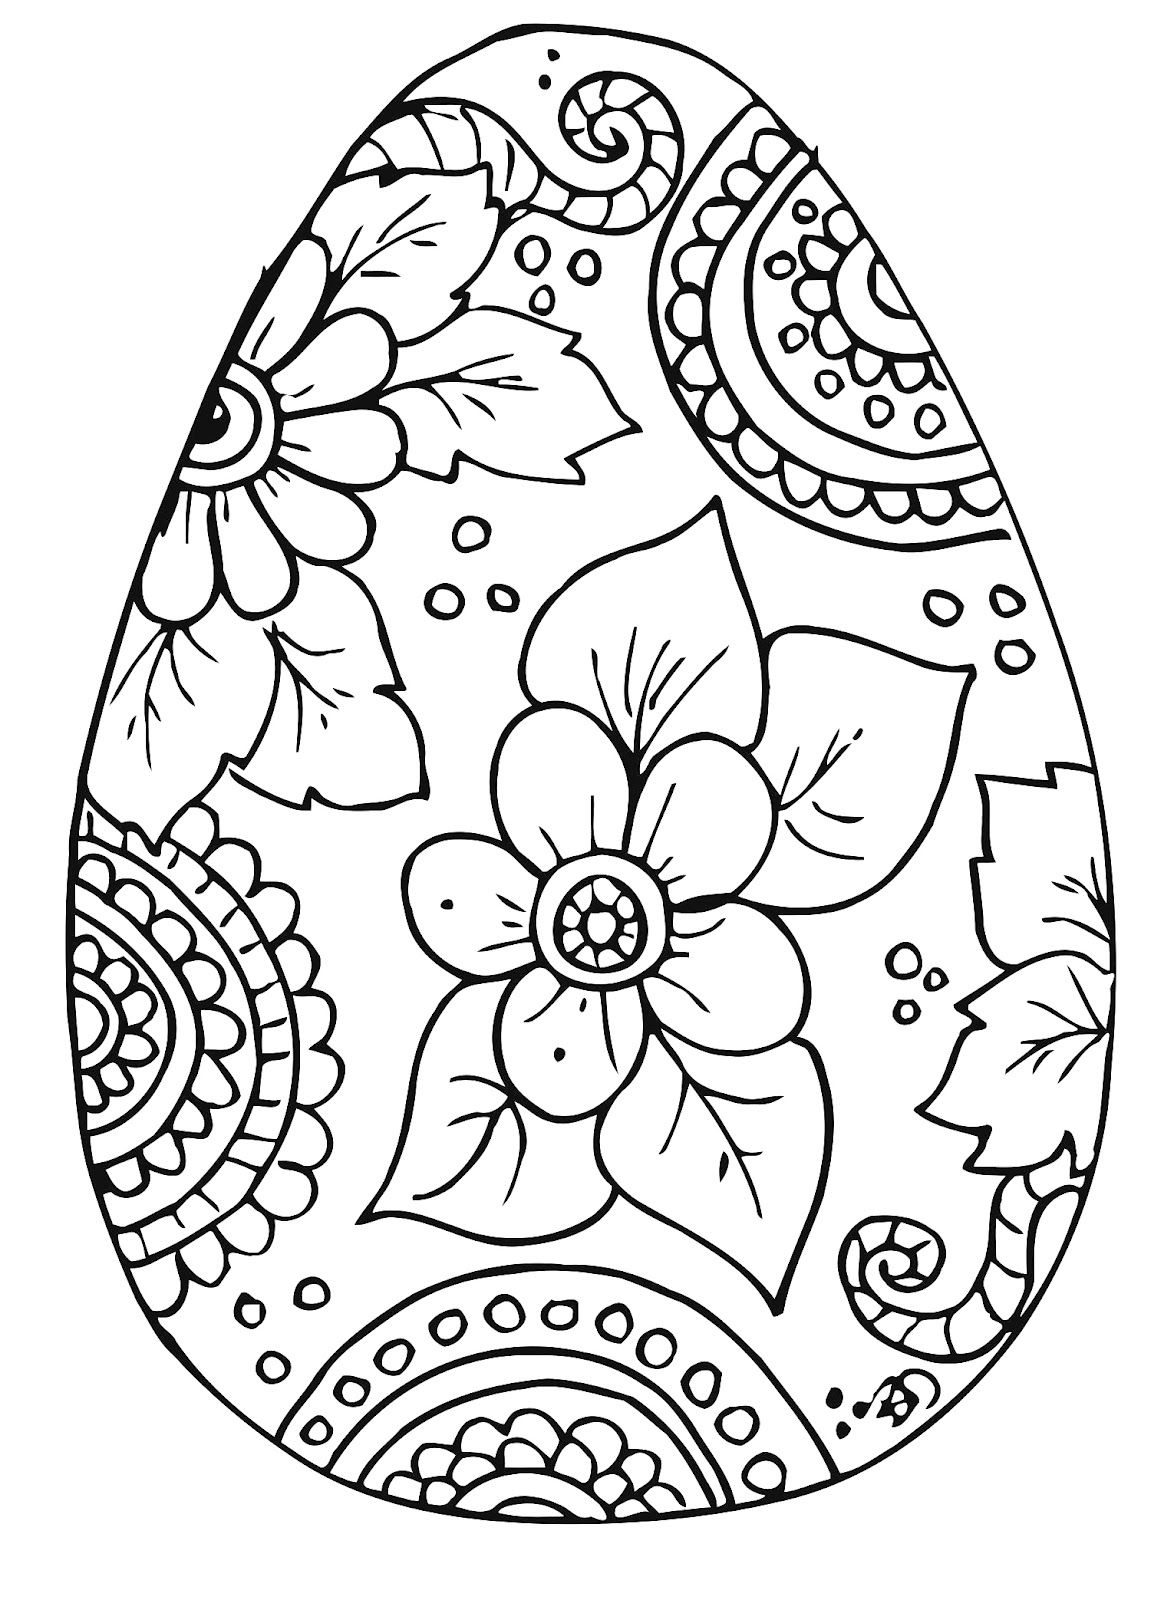 10 Cool Free Printable Easter Coloring Pages For Kids Who&amp;#039;ve Moved - Free Printable Easter Coloring Pages For Toddlers